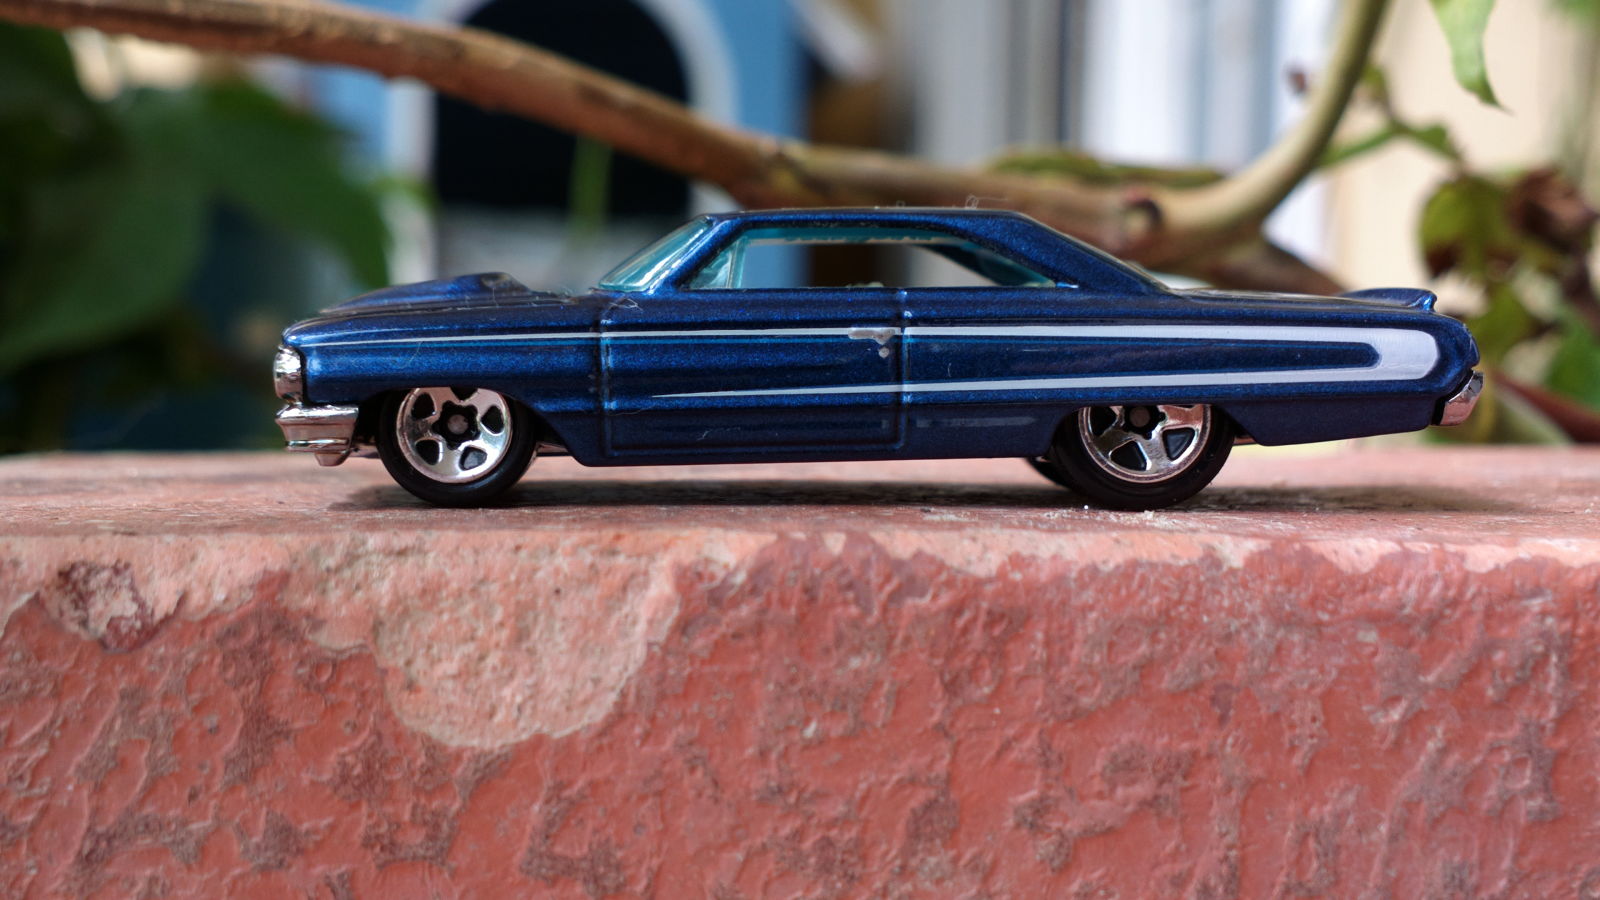 Illustration for article titled Custom 64 Ford Galaxie